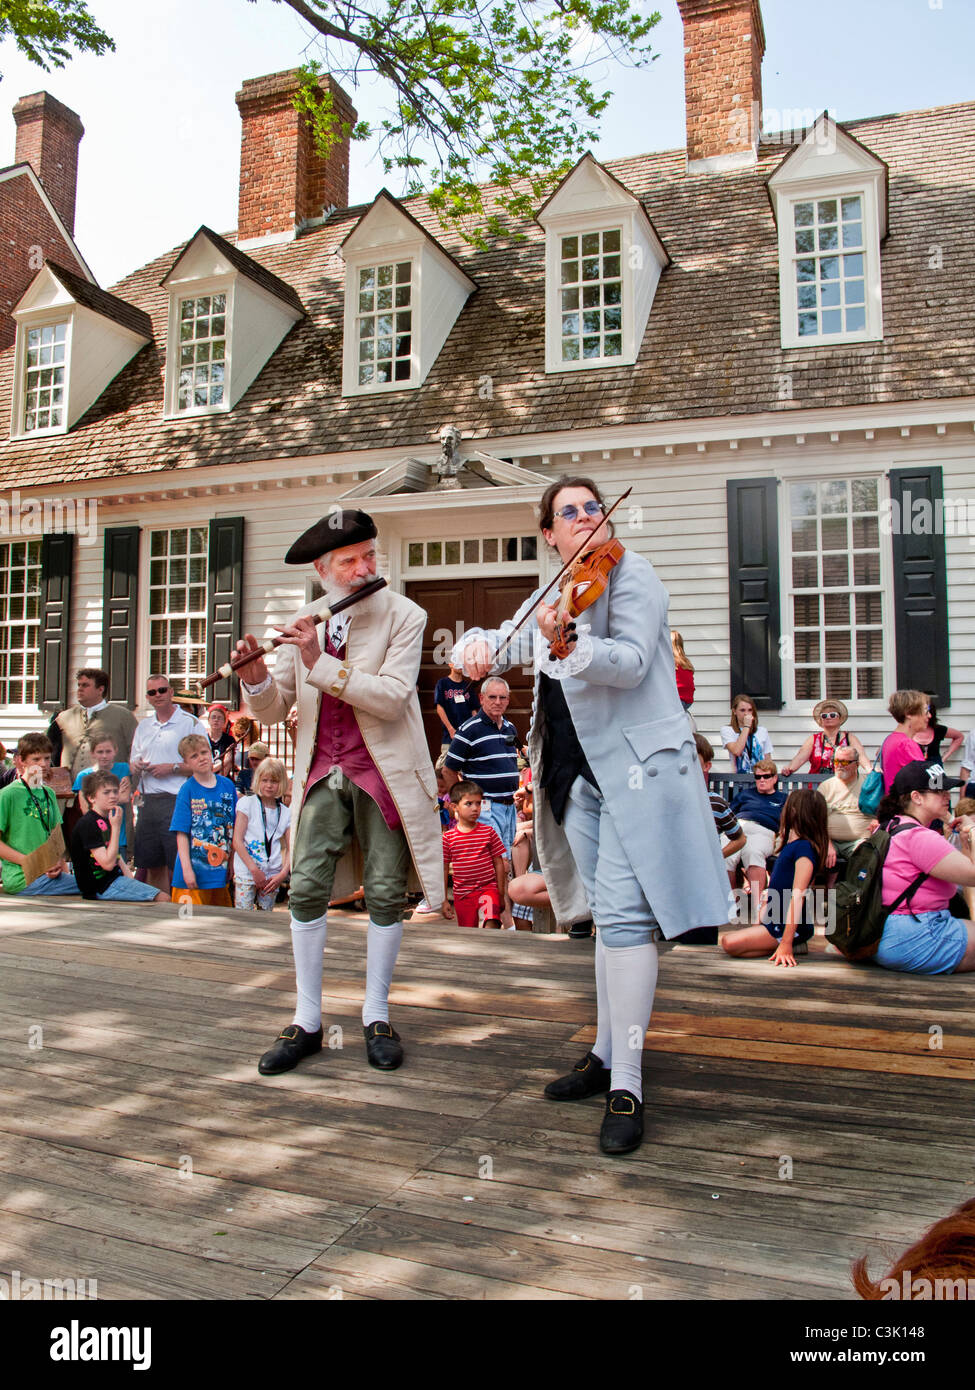 Wearing historic costumes, musicians play fiddle and flute outside the Raleigh Tavern in Colonial Williamsburg, VA. Stock Photo